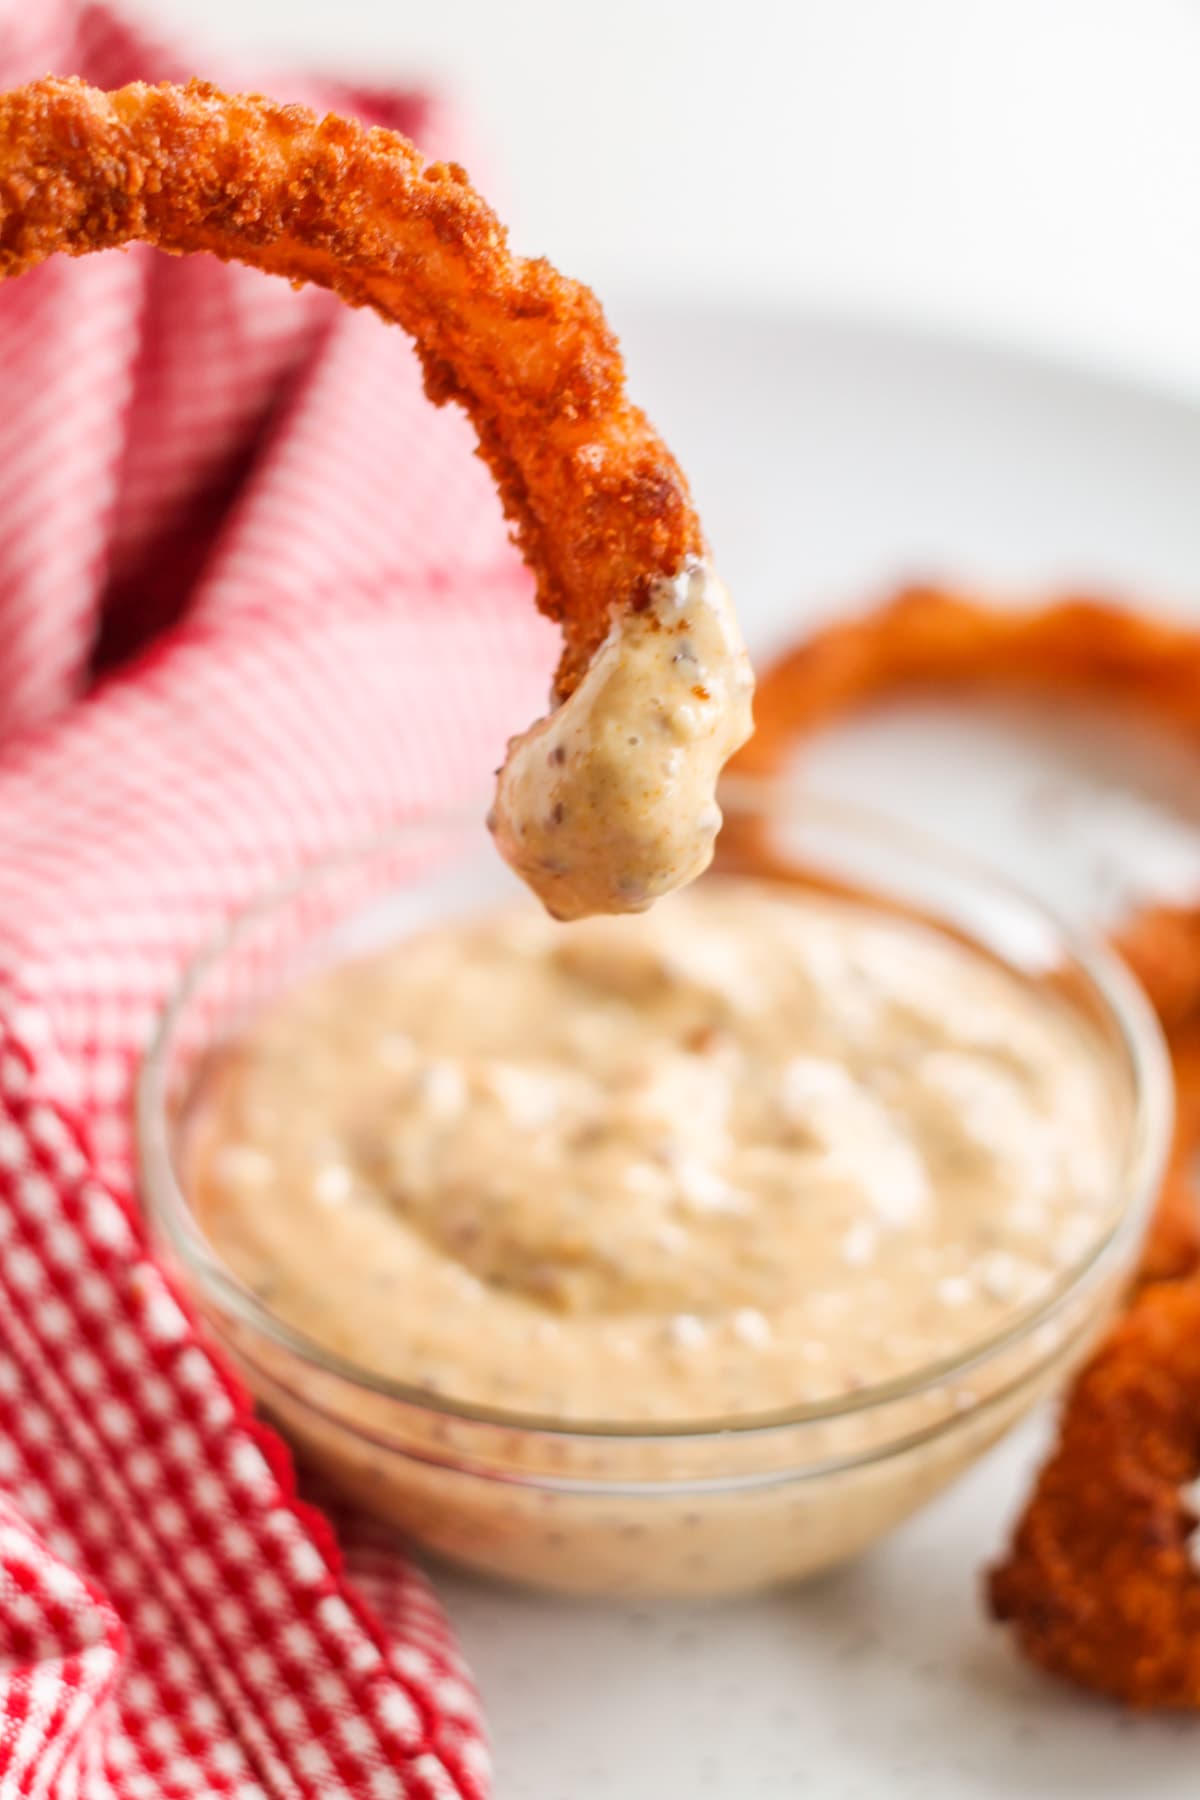 Dipping sauce in a small glass bowl with a baked onion ring being dipped into it.